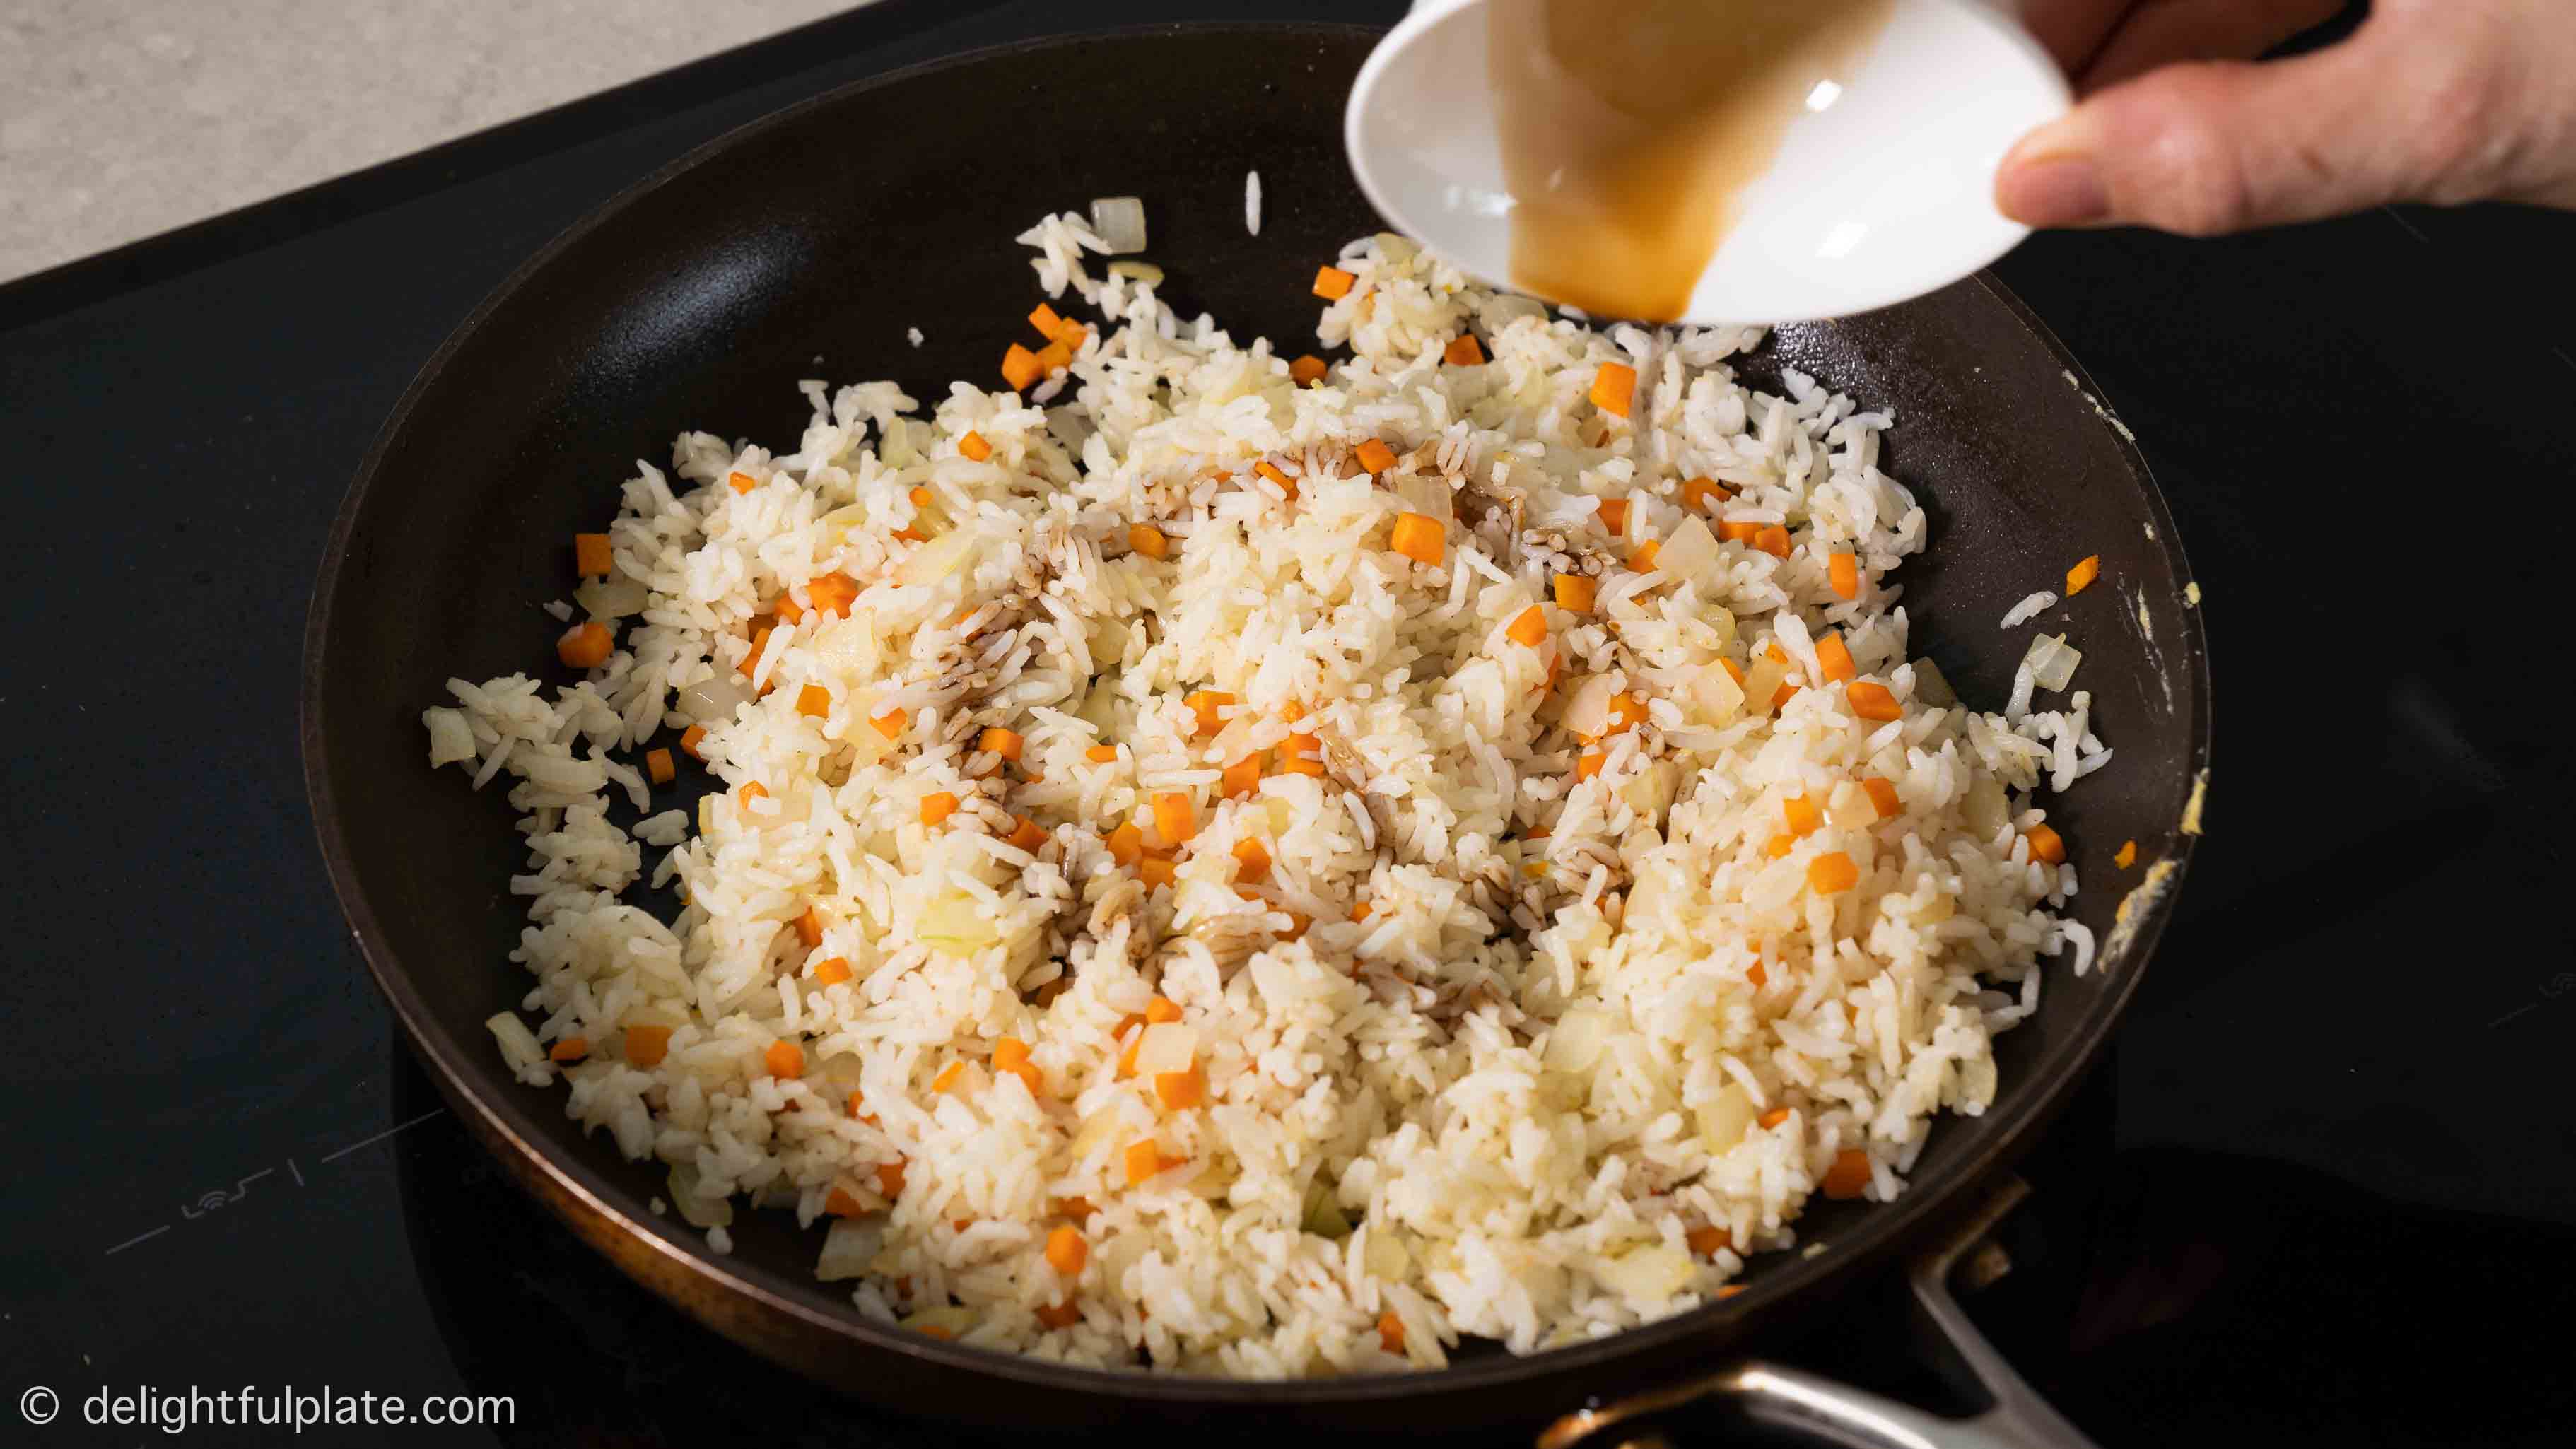 Frying rice with diced vegetables in the pan